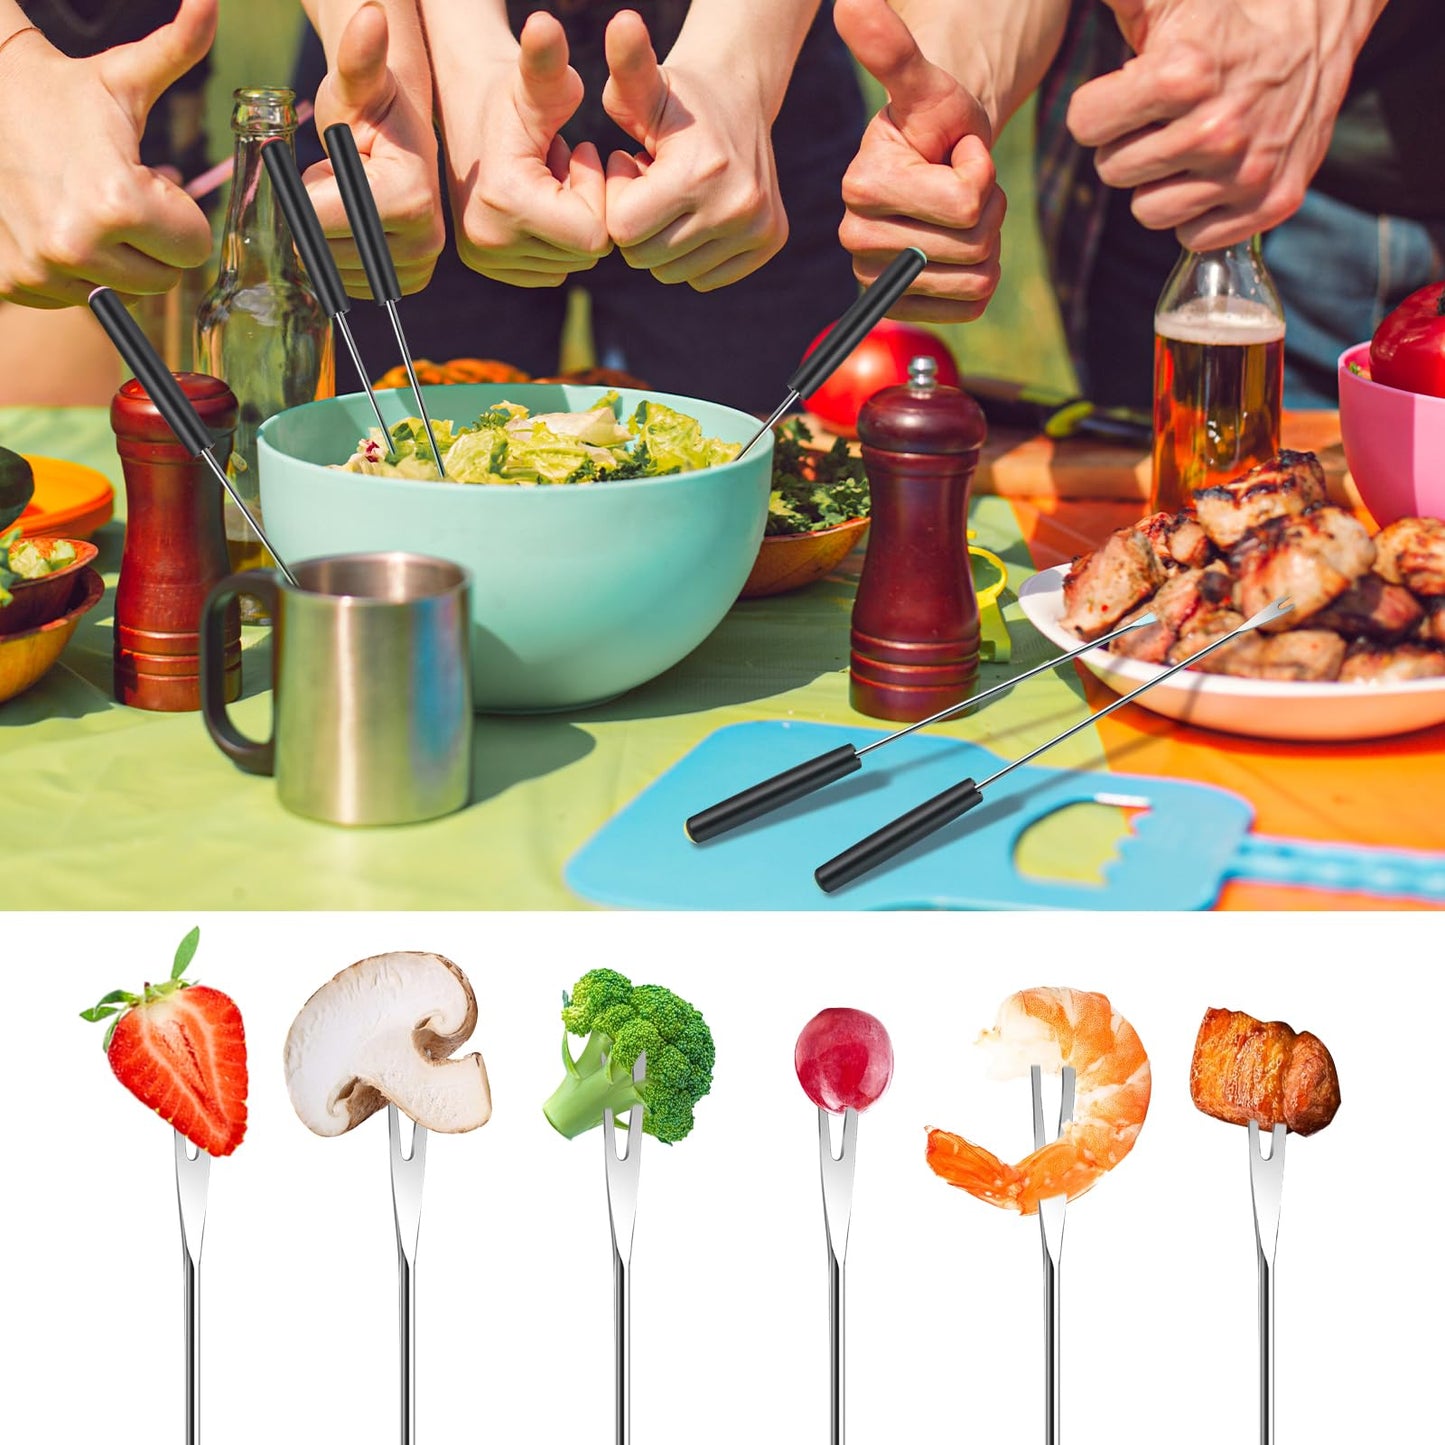 6 Pcs Fondue Forks Stainless Steel Fondue Forks Long Forks Cheese Fondue Forks with Heat Resistant Handle for Roast Meat Chocolate Dessert Cheese Marshmallows